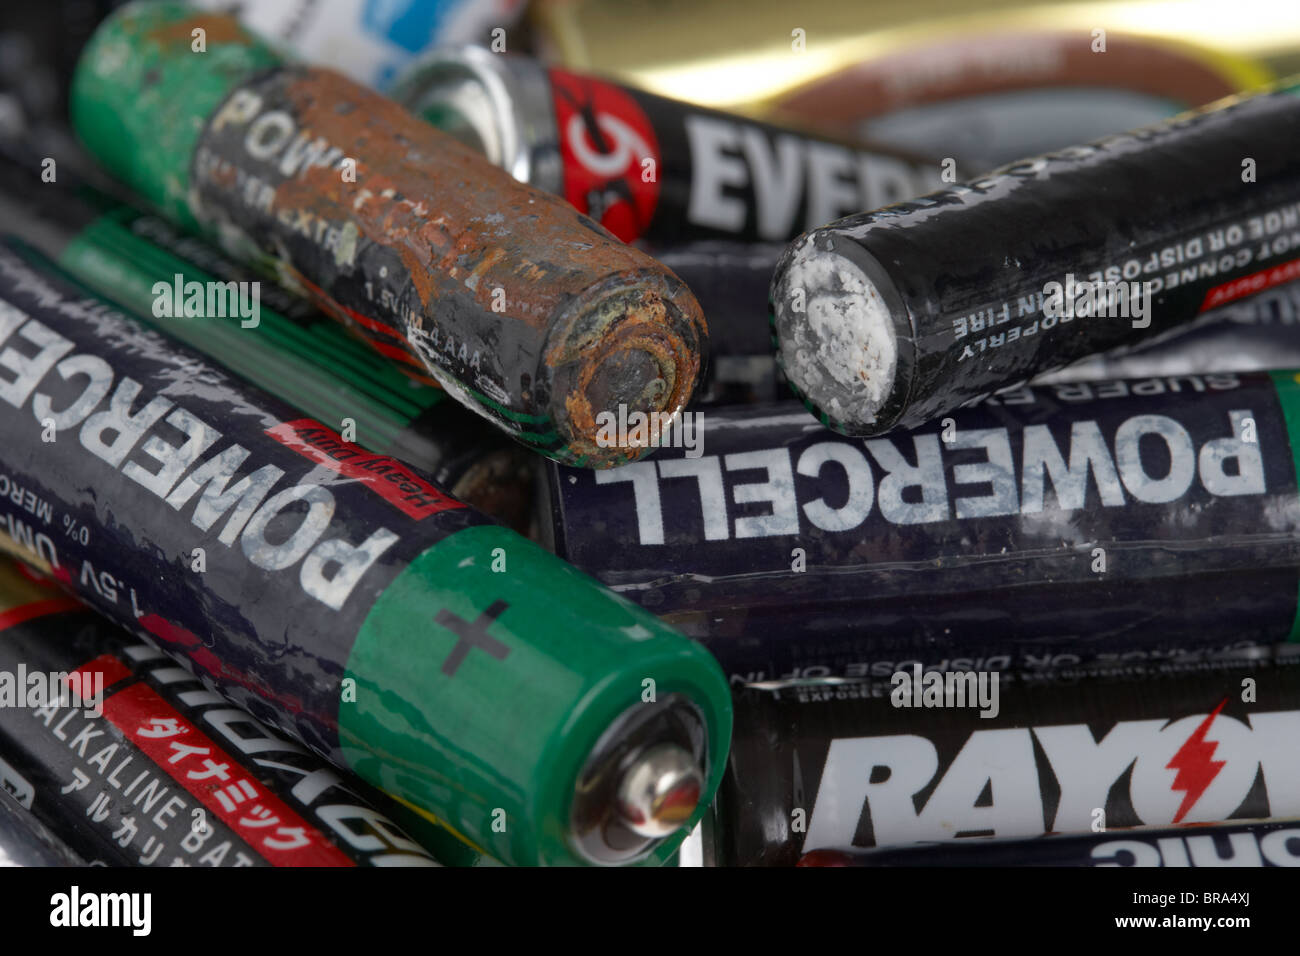 pile of used corroding batteries Stock Photo